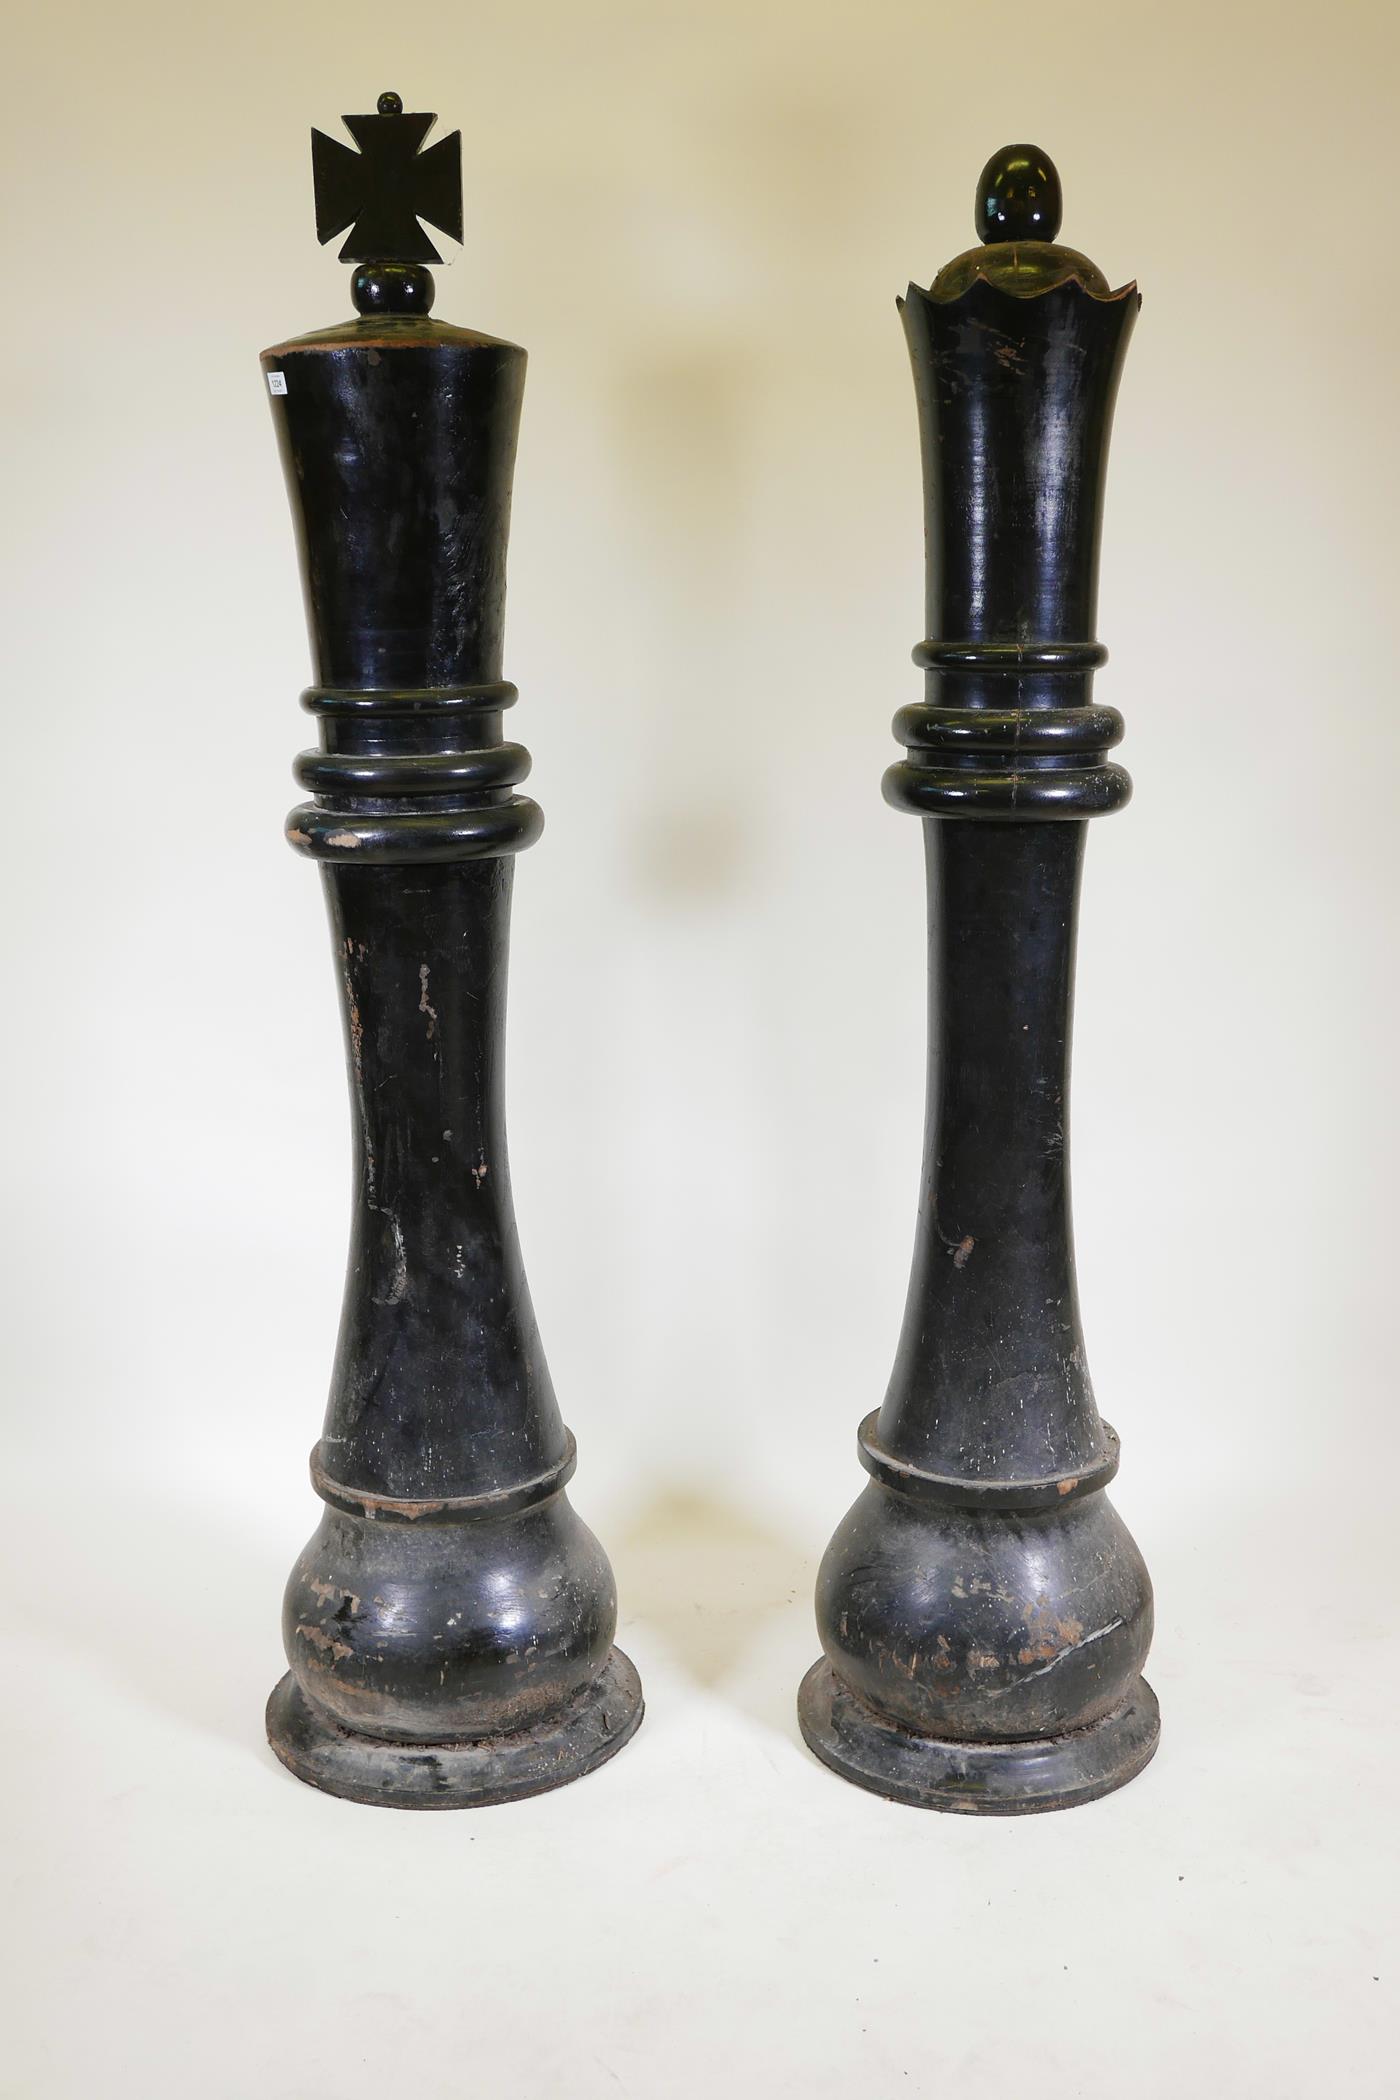 A pair of giant 'King and Queen' chess pieces, 72" high